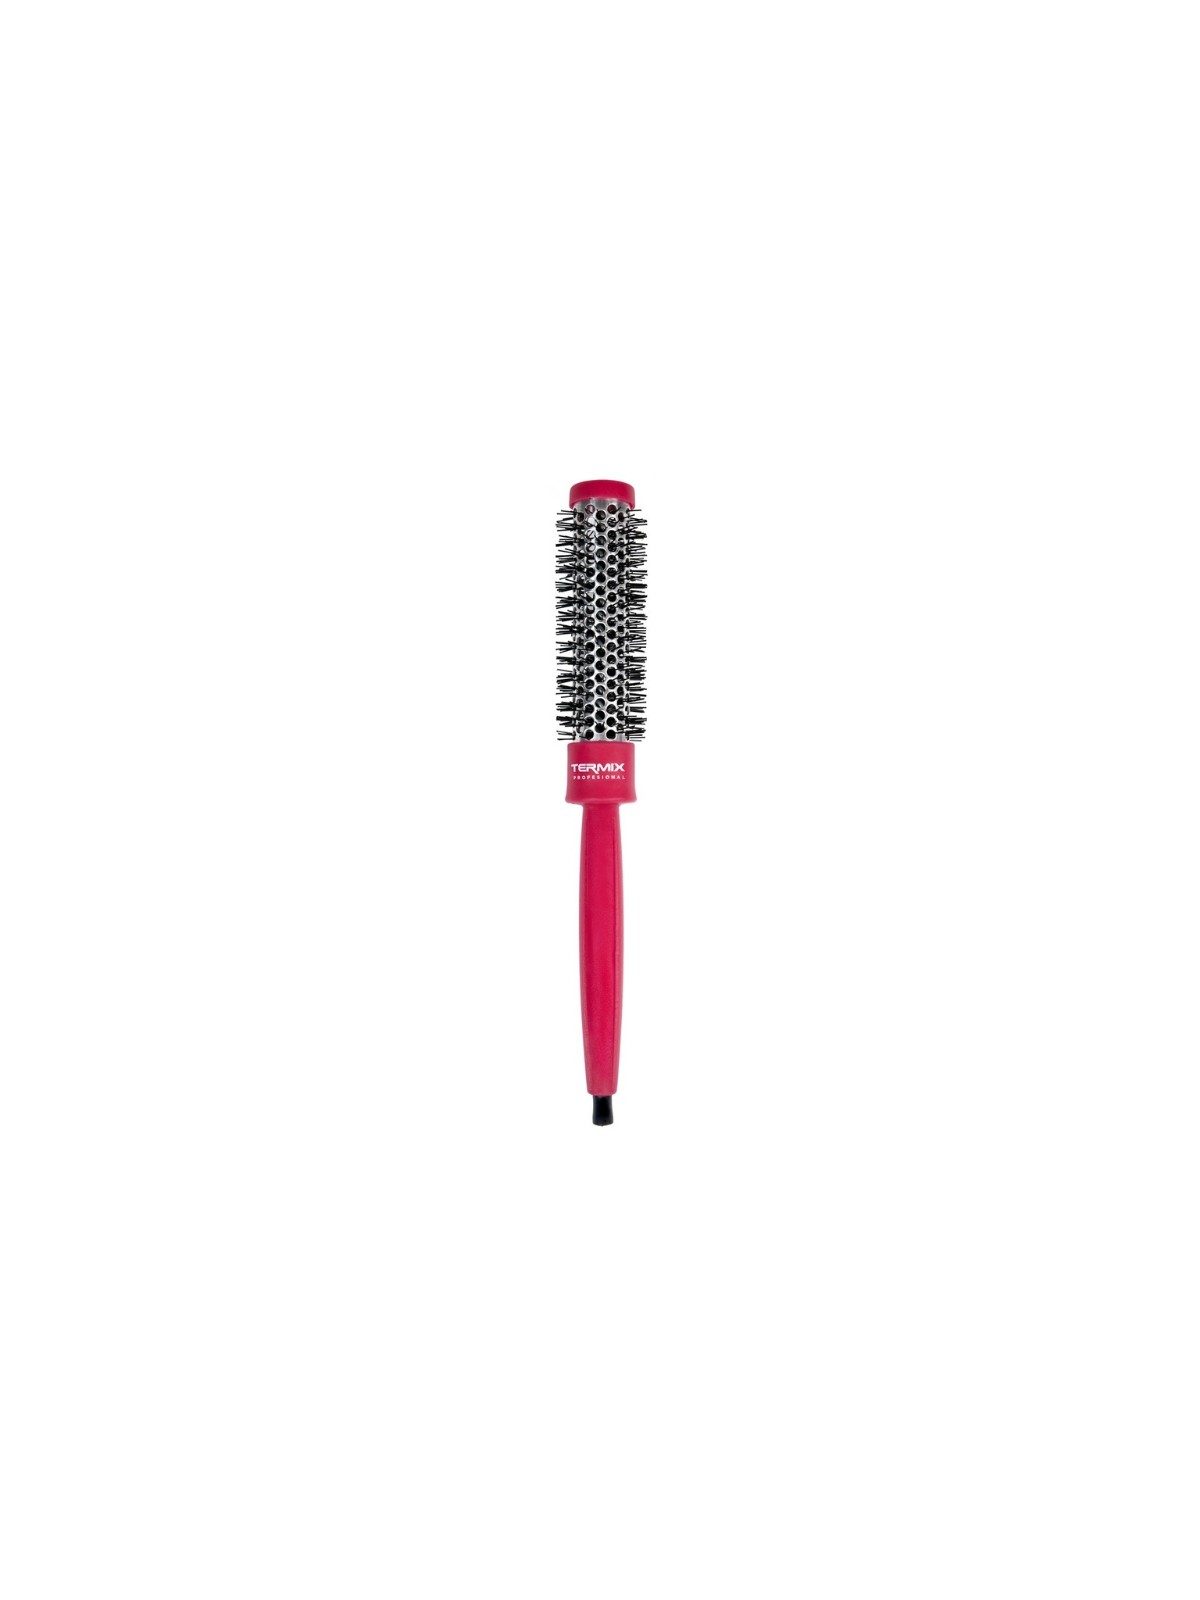 Pack 4 Cepillos Termix Profesional Red Magenta